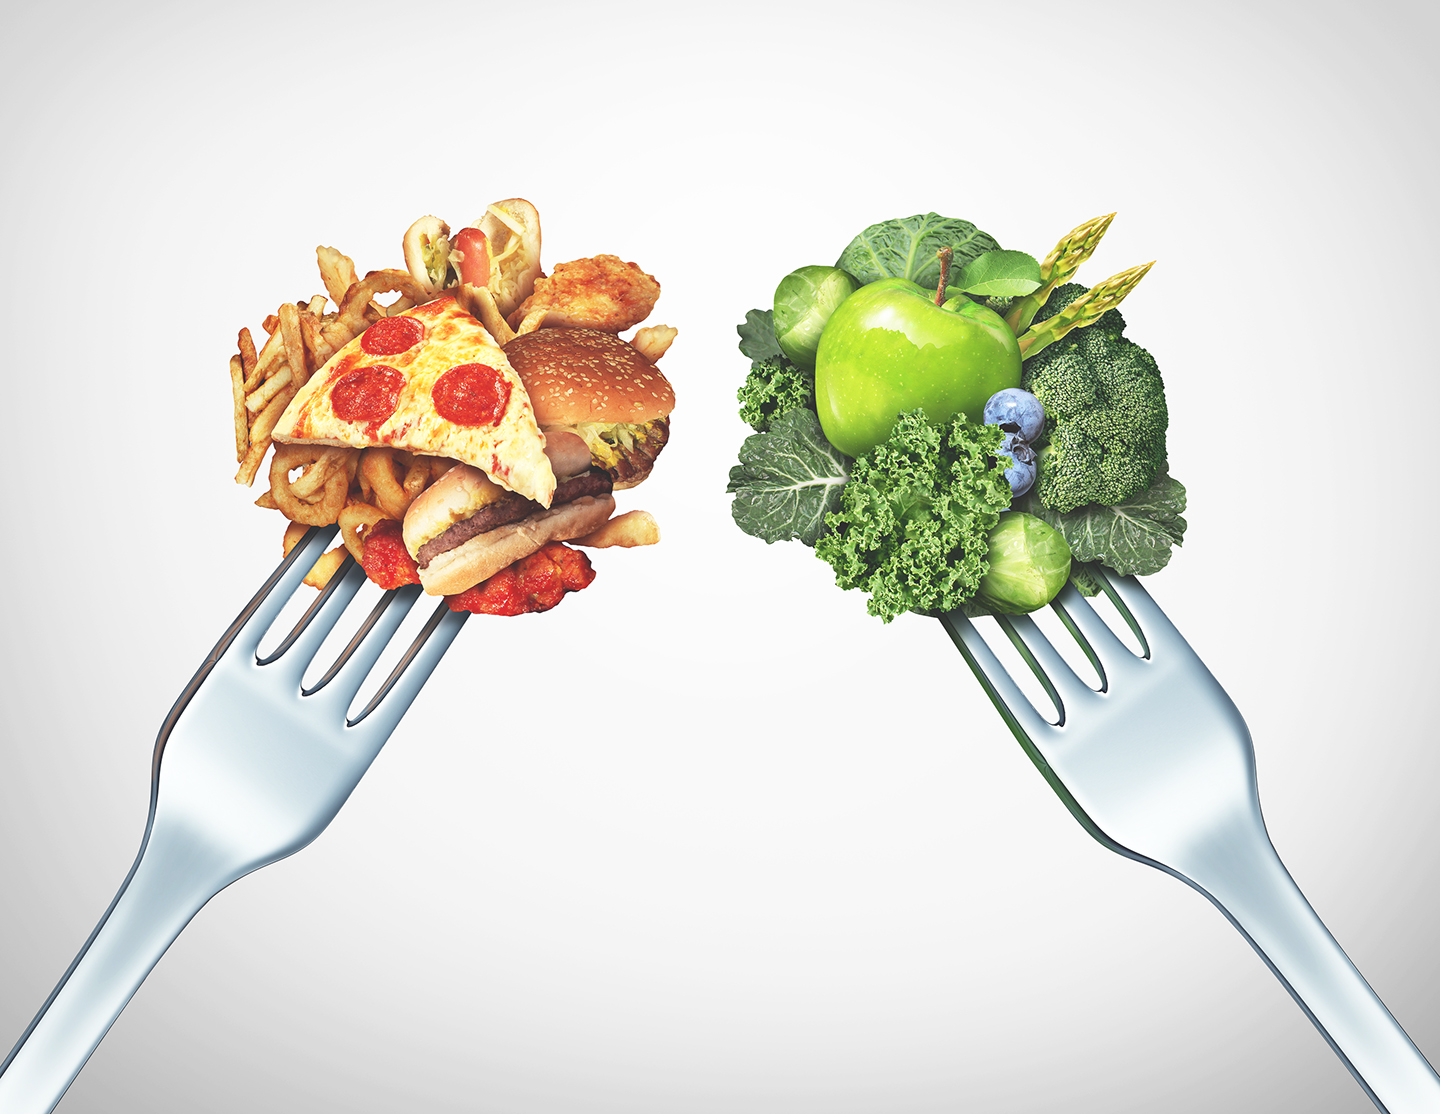 Diet struggle and decision concept and nutrition choices dilemma between healthy good fresh fruit and vegetables or greasy cholesterol rich fast food with two dinner forks competing to decide what to eat.